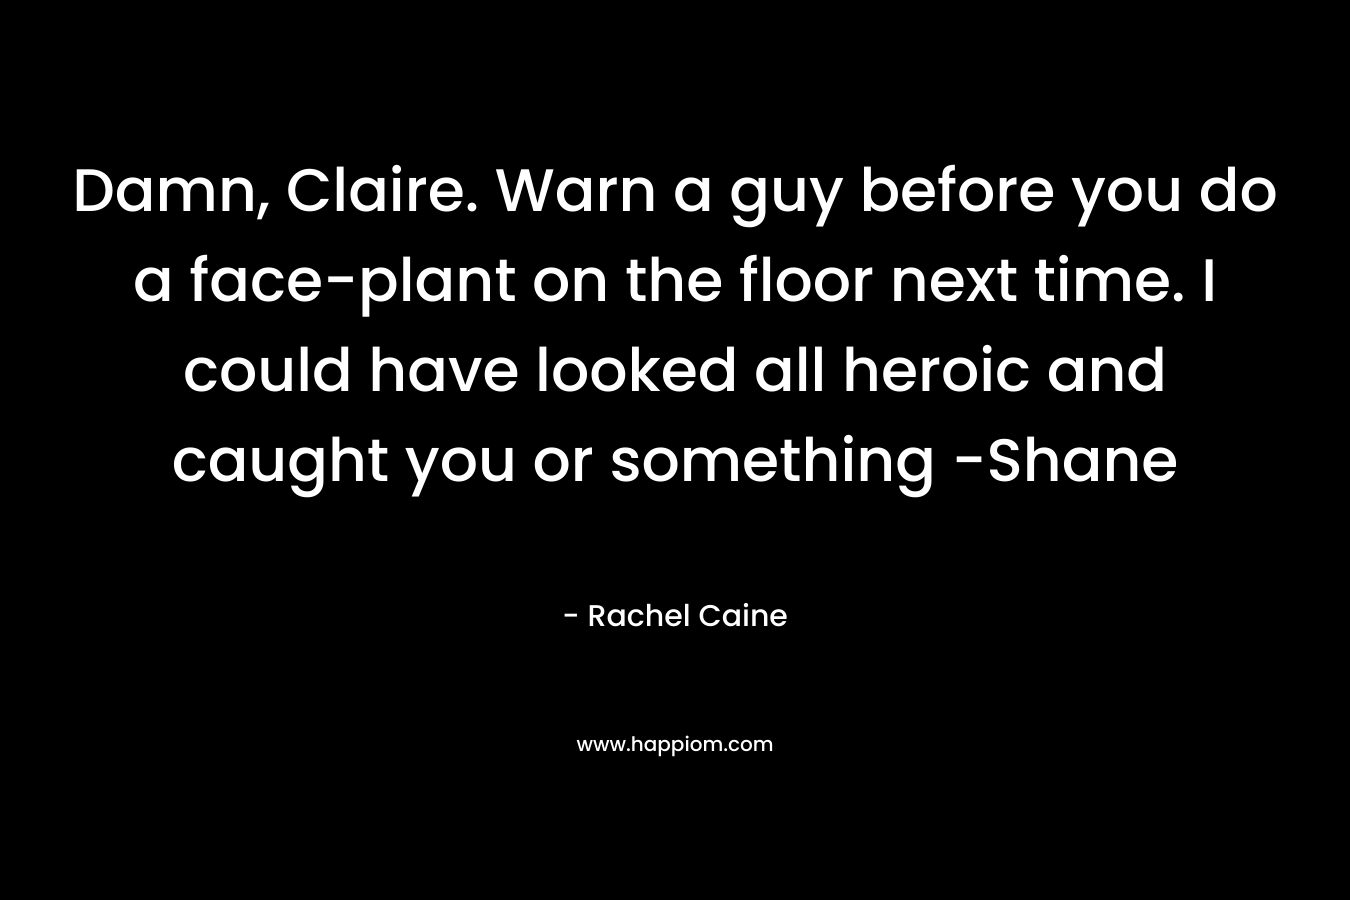 Damn, Claire. Warn a guy before you do a face-plant on the floor next time. I could have looked all heroic and caught you or something -Shane – Rachel Caine